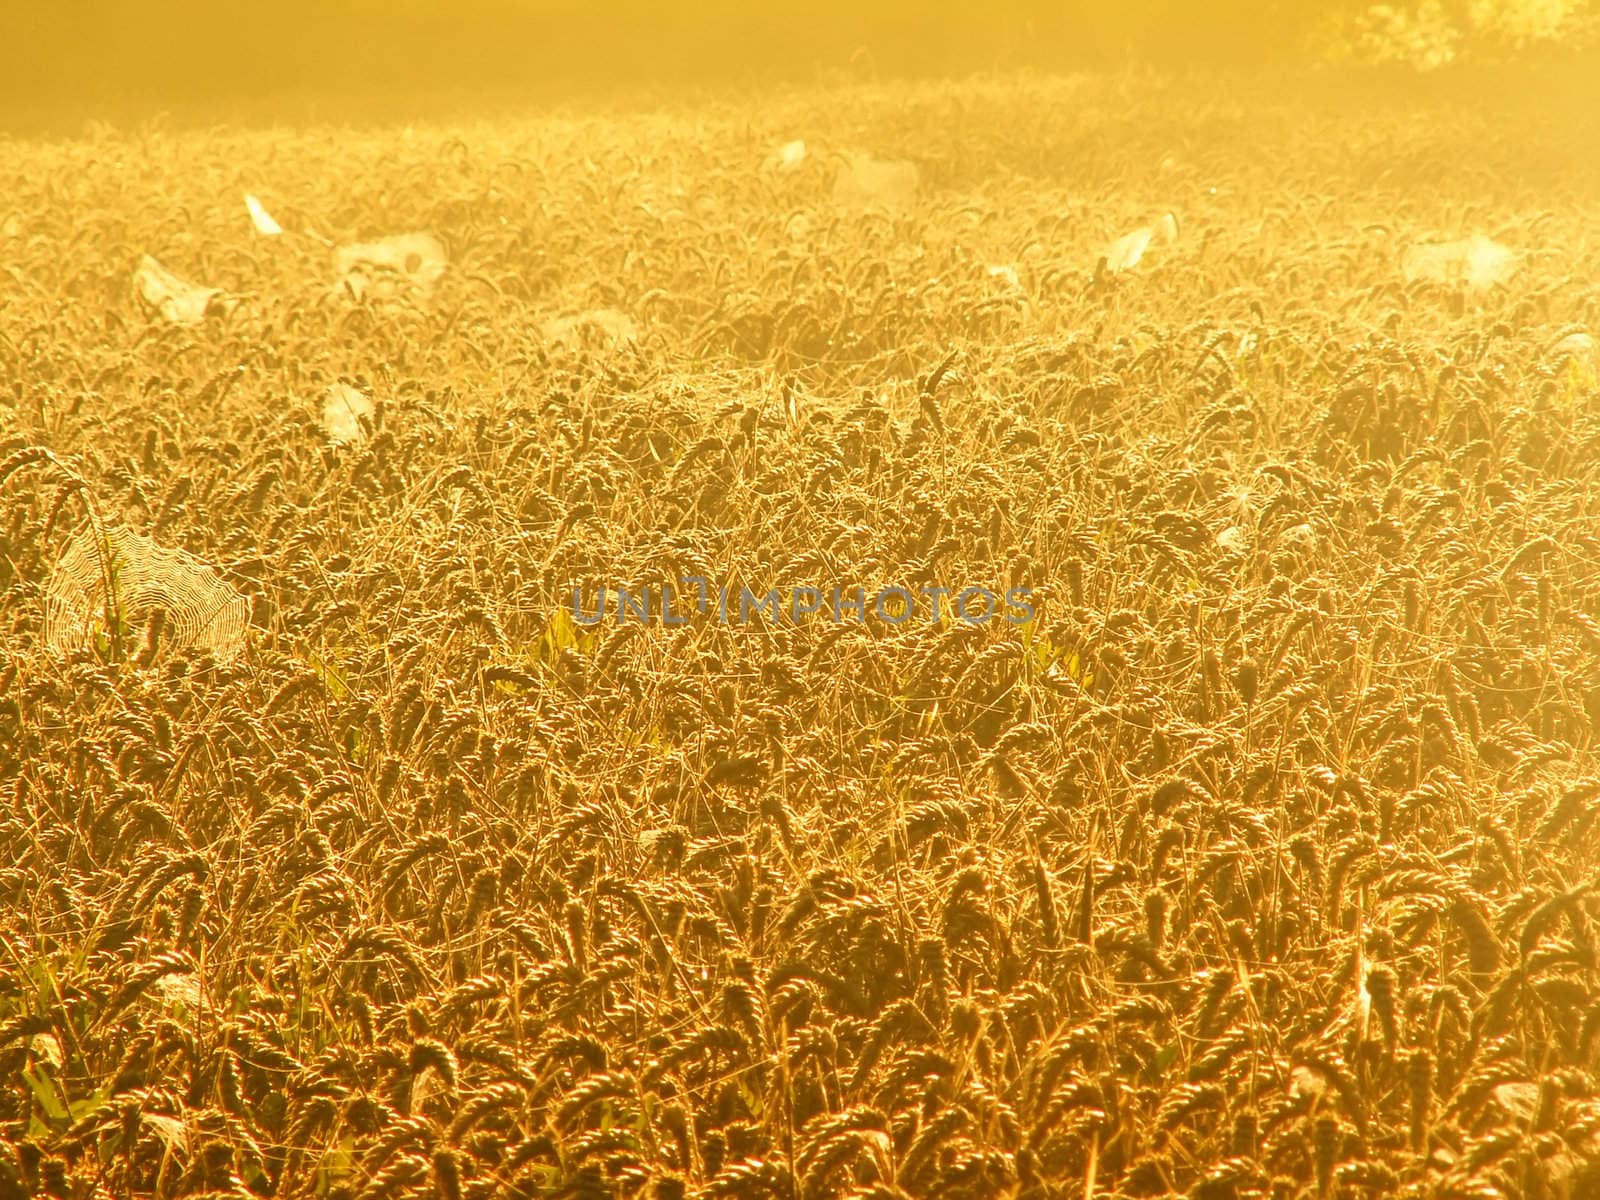 cobwebs  in the golden wheat